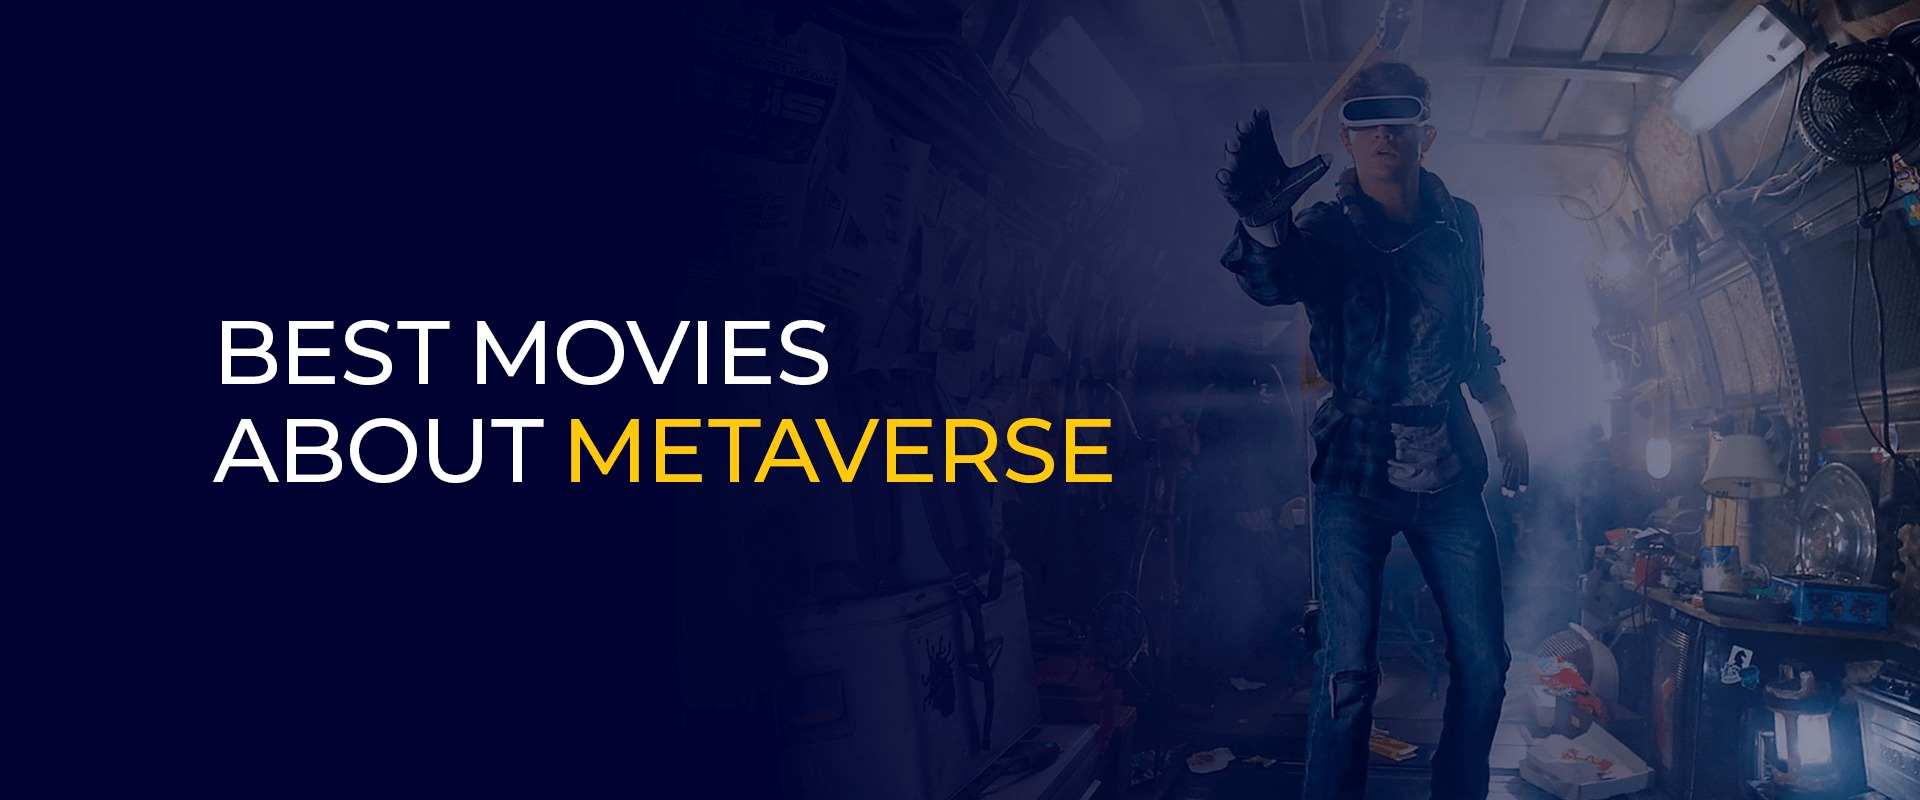 Best Movies about metaverse